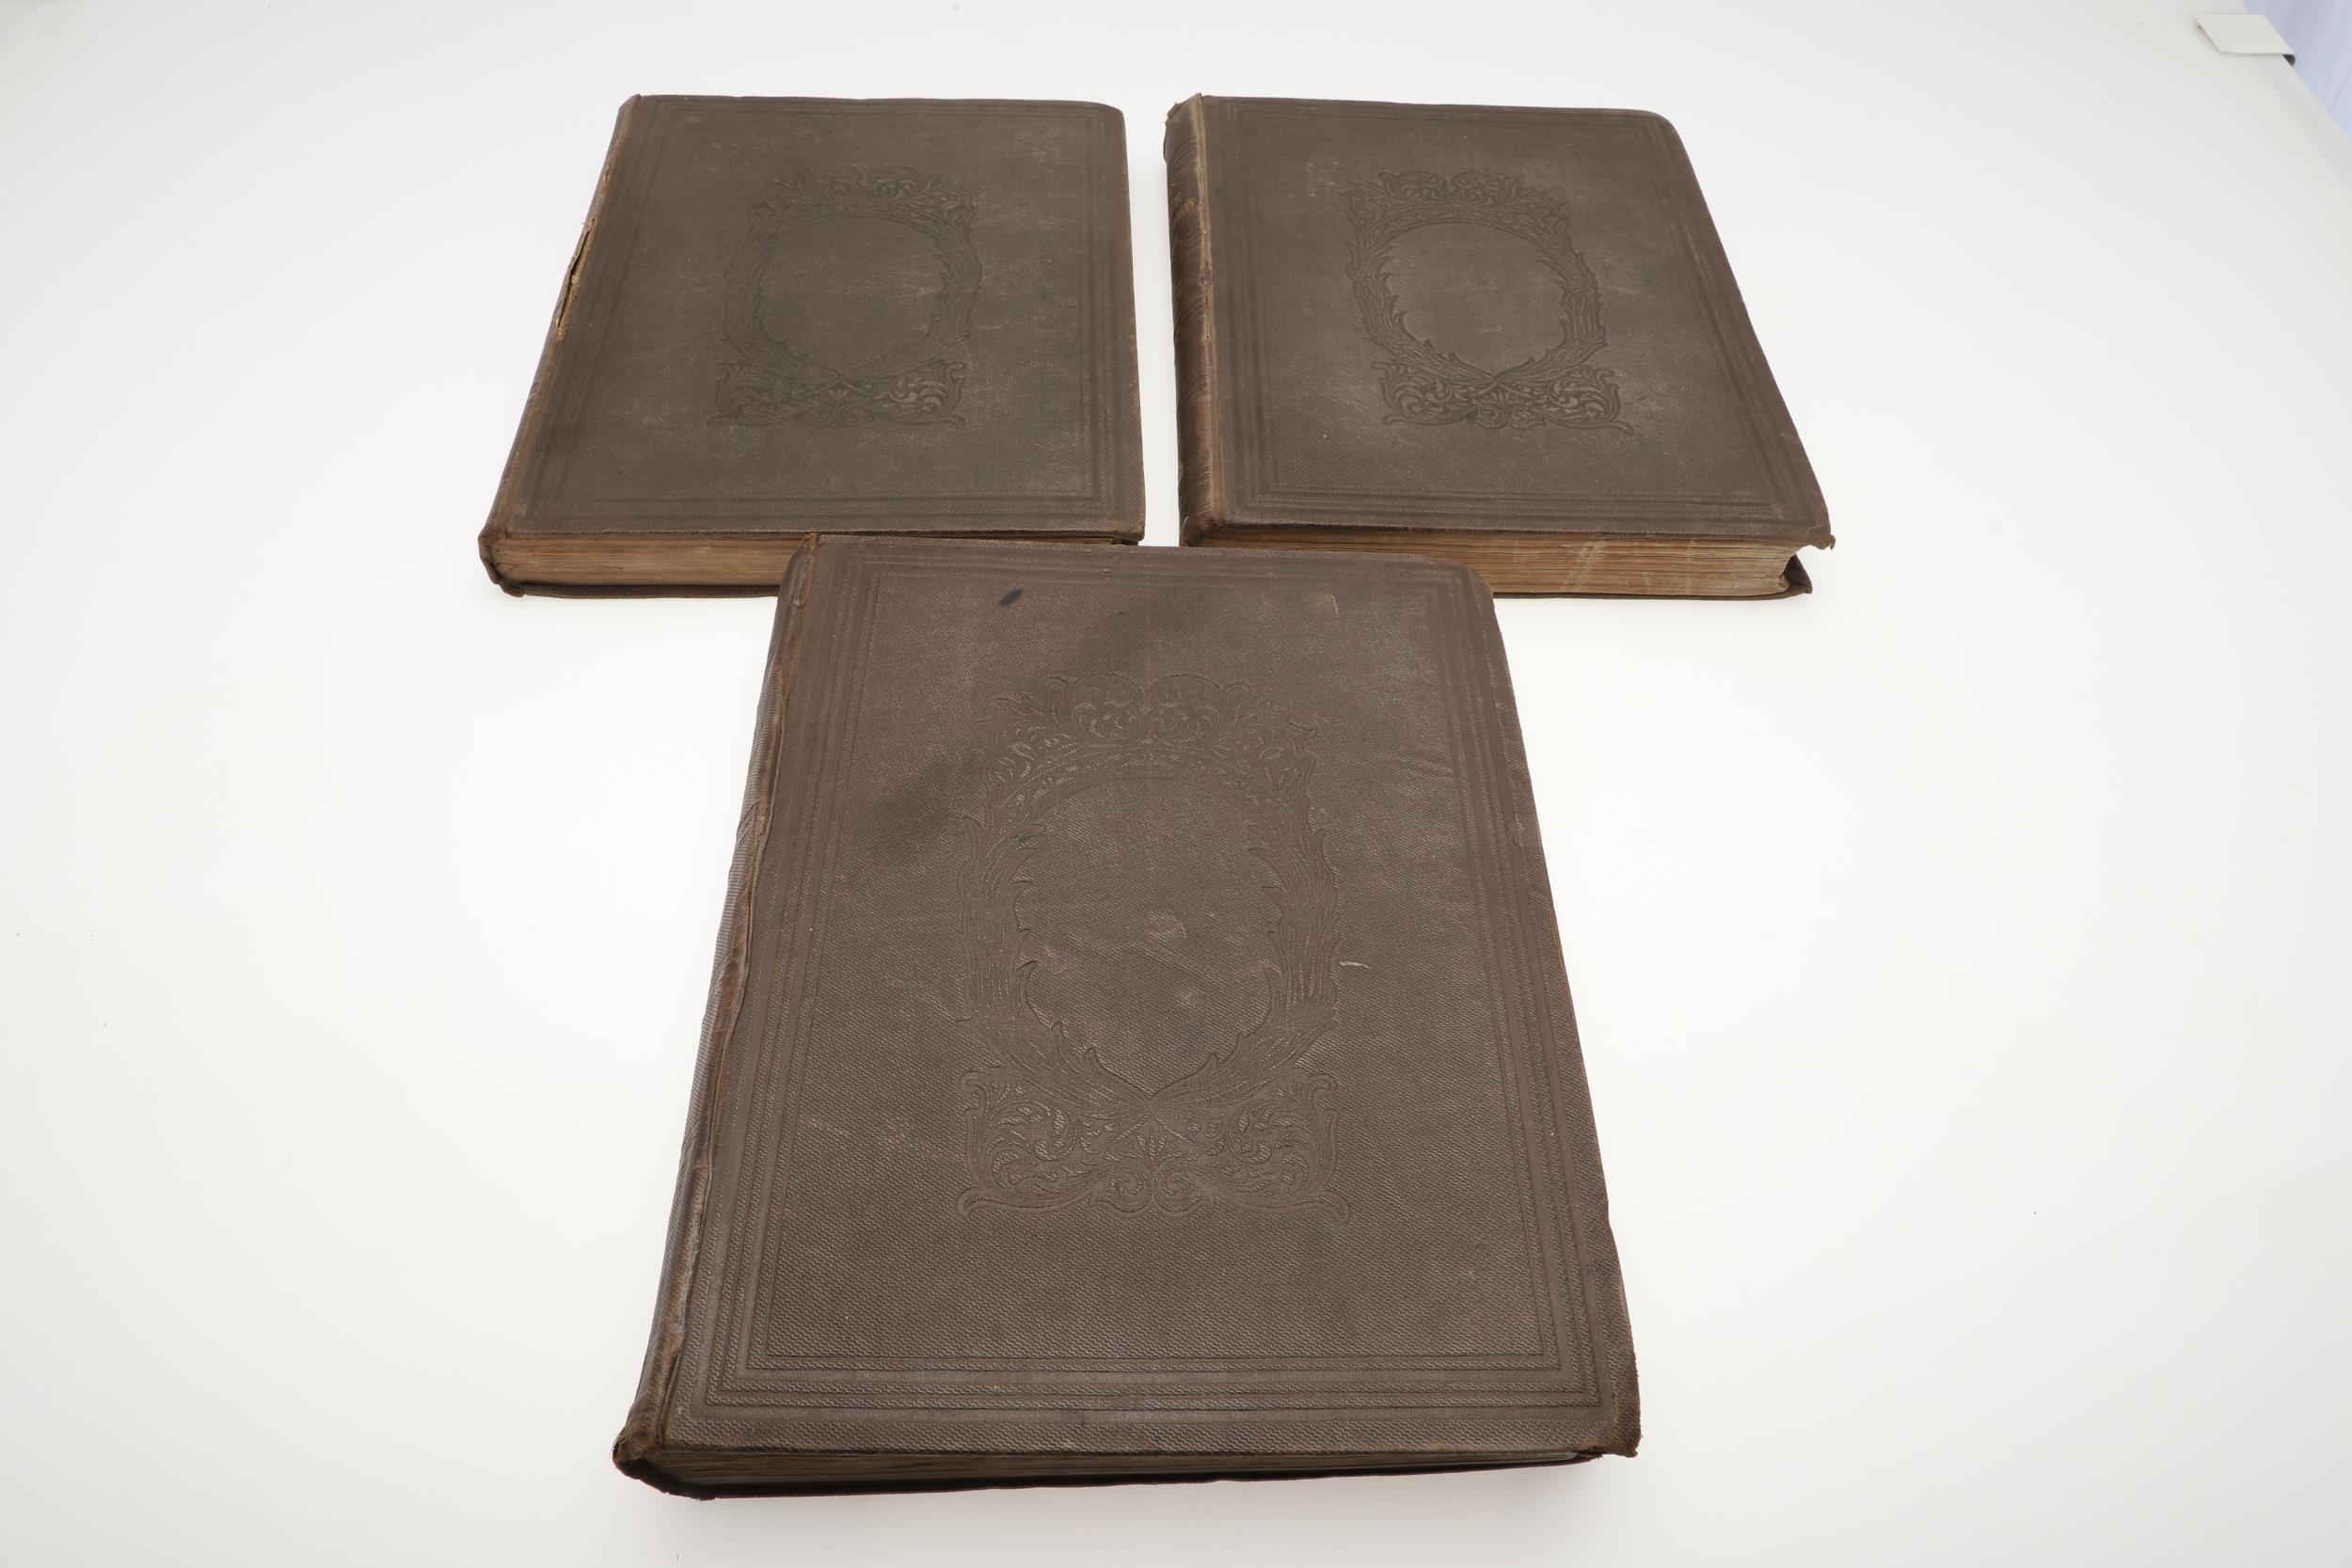 ANNALS OF THE COINAGE OF GREAT BRITAIN, 1840, THE REV. ROGERS RUDING. 3 VOLUMES. - Image 4 of 10